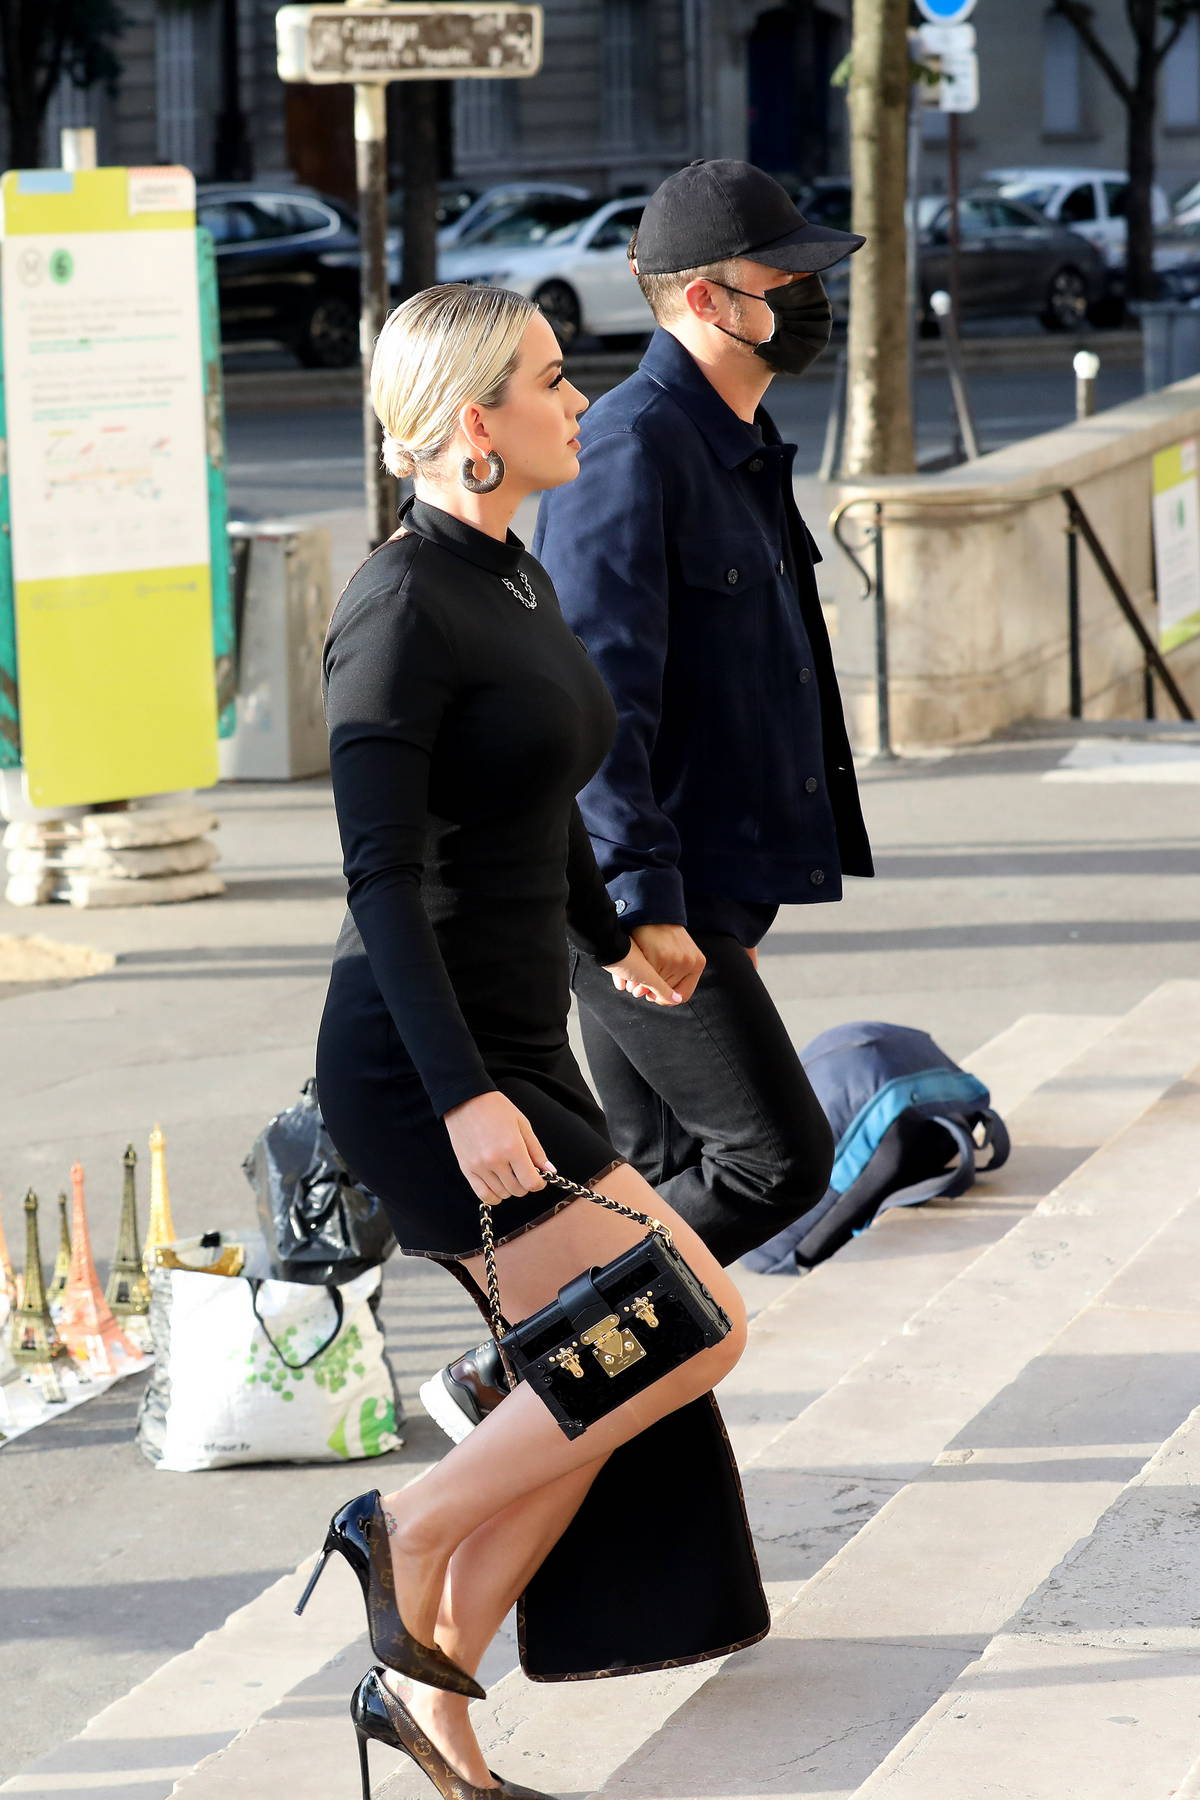 Katy Perry and fiancé Orlando Bloom exit swanky French restaurant during  stay in Paris